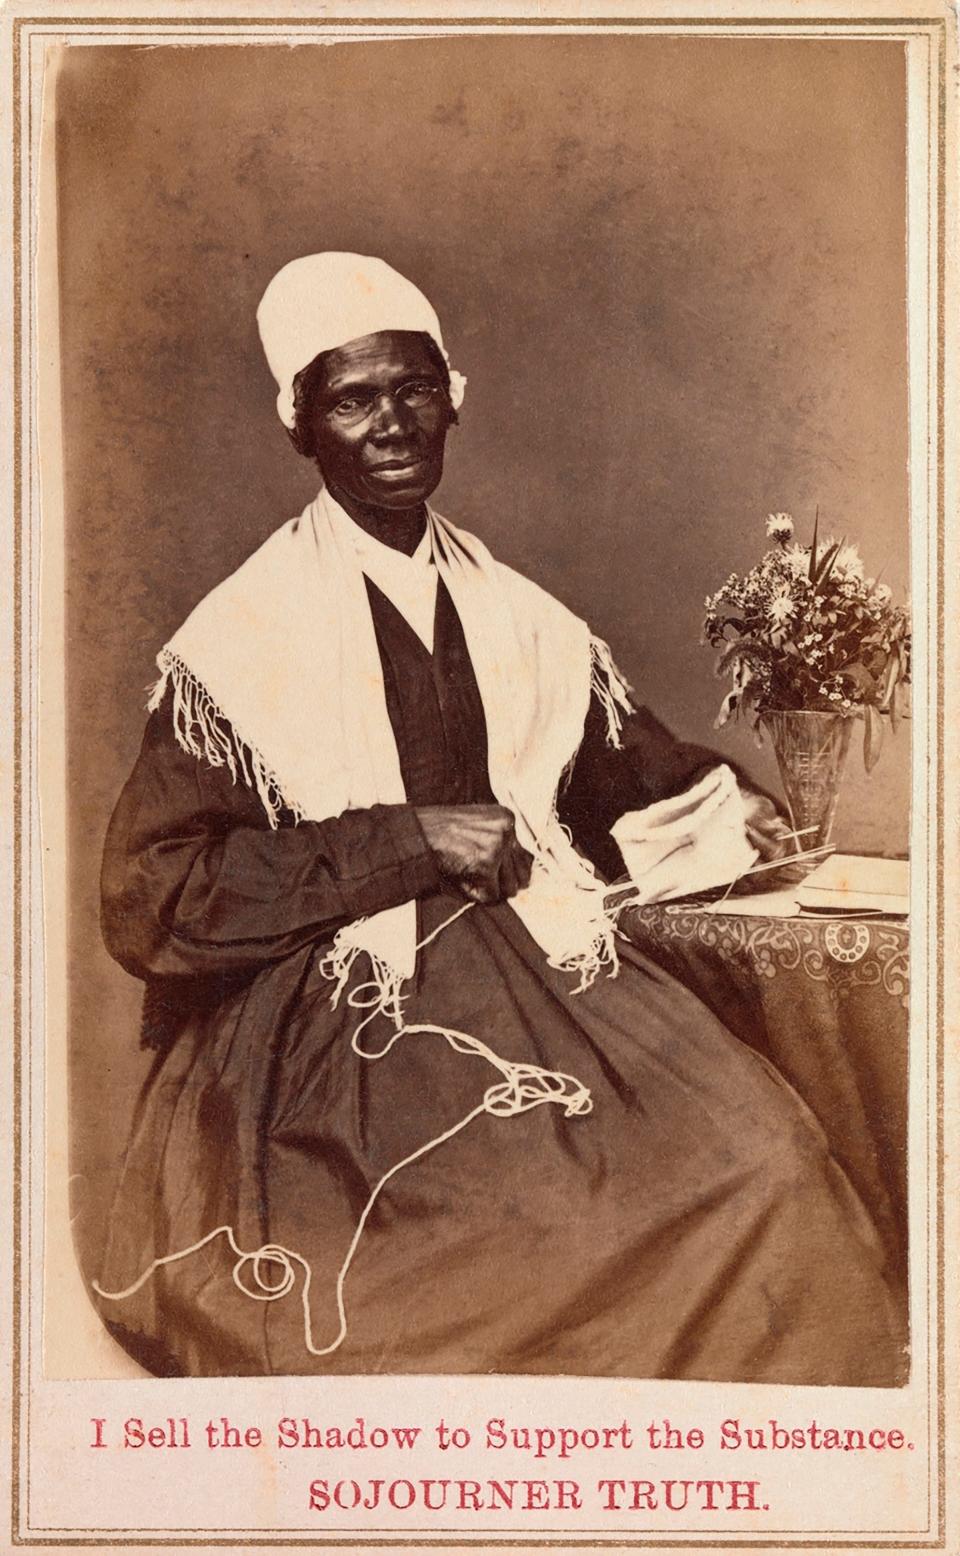 Born Isabella Baumfree to a family of slaves in Ulster County, New York, the sixty-seven year old abolitionist, Sojourner Truth, pauses from her knitting and looks at the camera in this 1864 photograph.